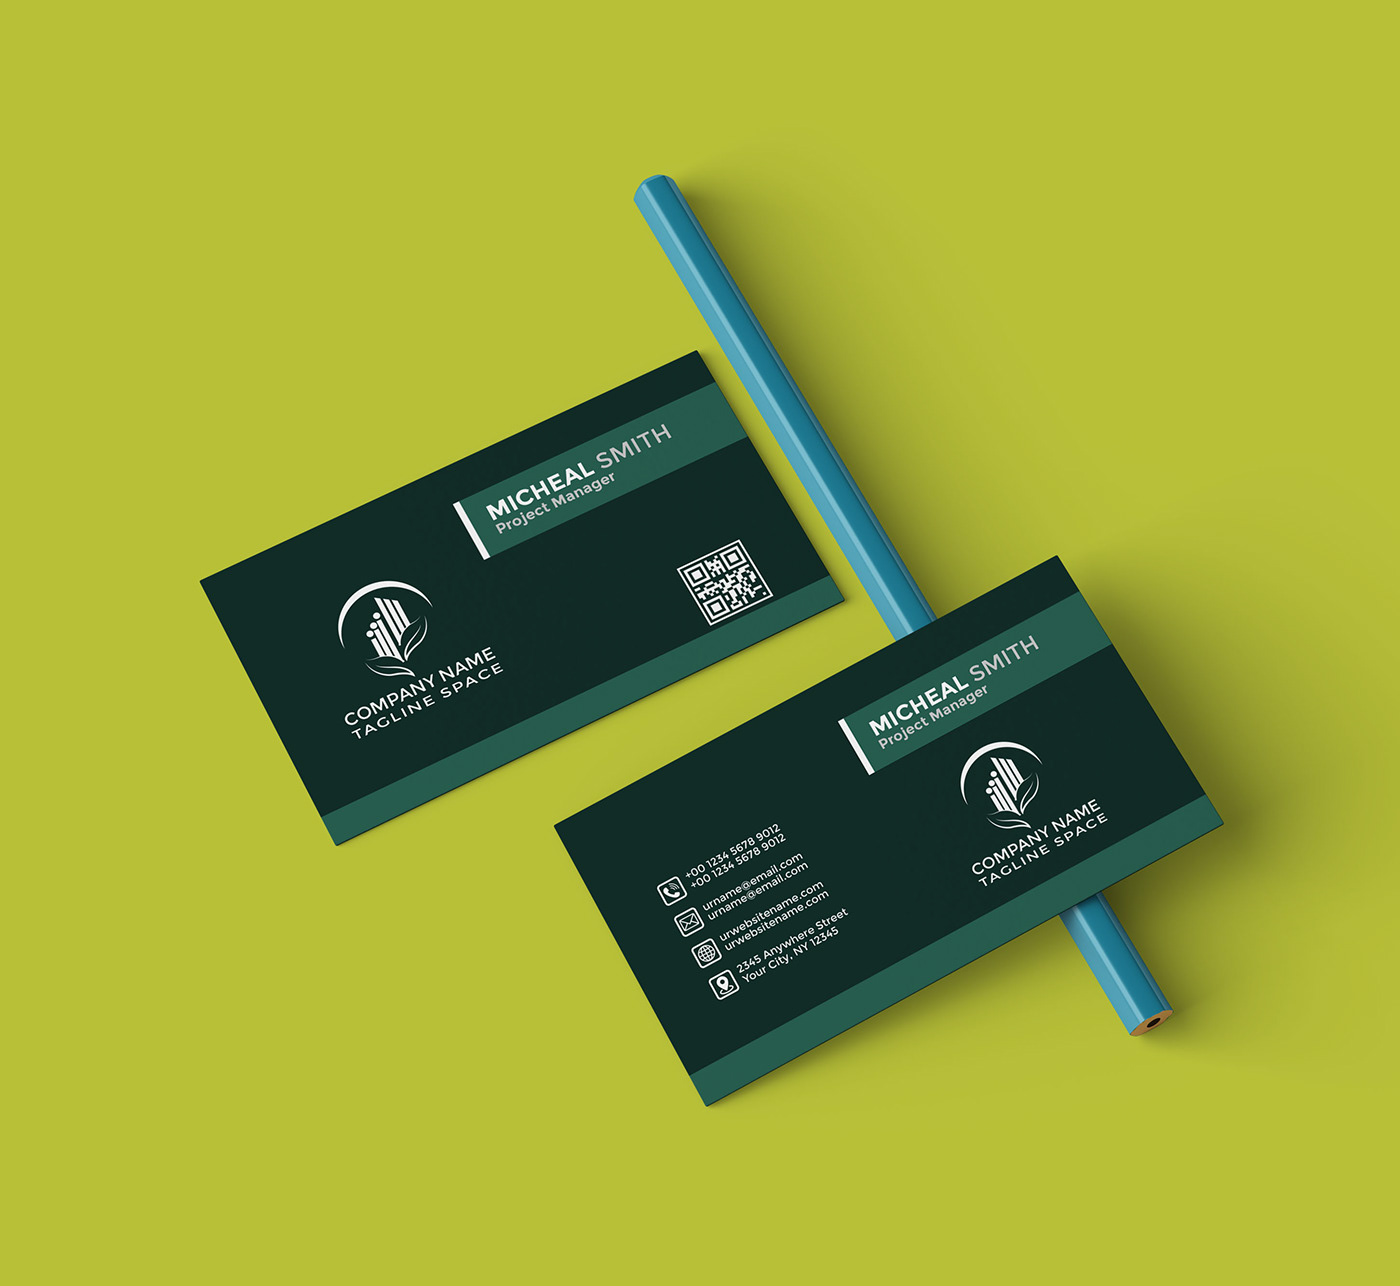 business card Business card design business brand identity card visual identity visiting card identity Brand Design Corporate Identity